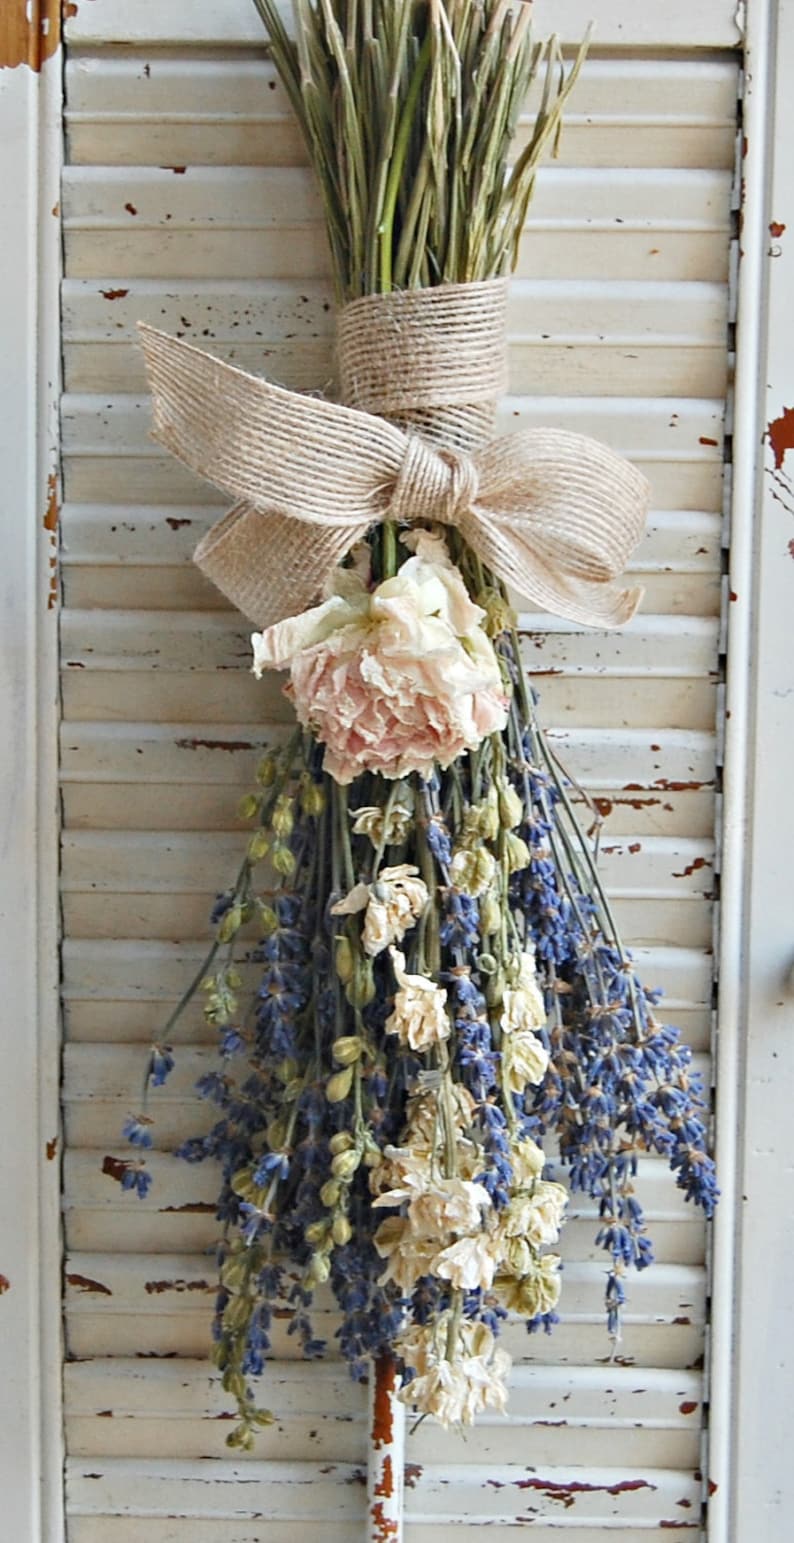 Mothers Day Dried Lavender Bouquet with Dried Larkspur and Peony / Dried Flower Arrangement / Spring Bouquet image 2